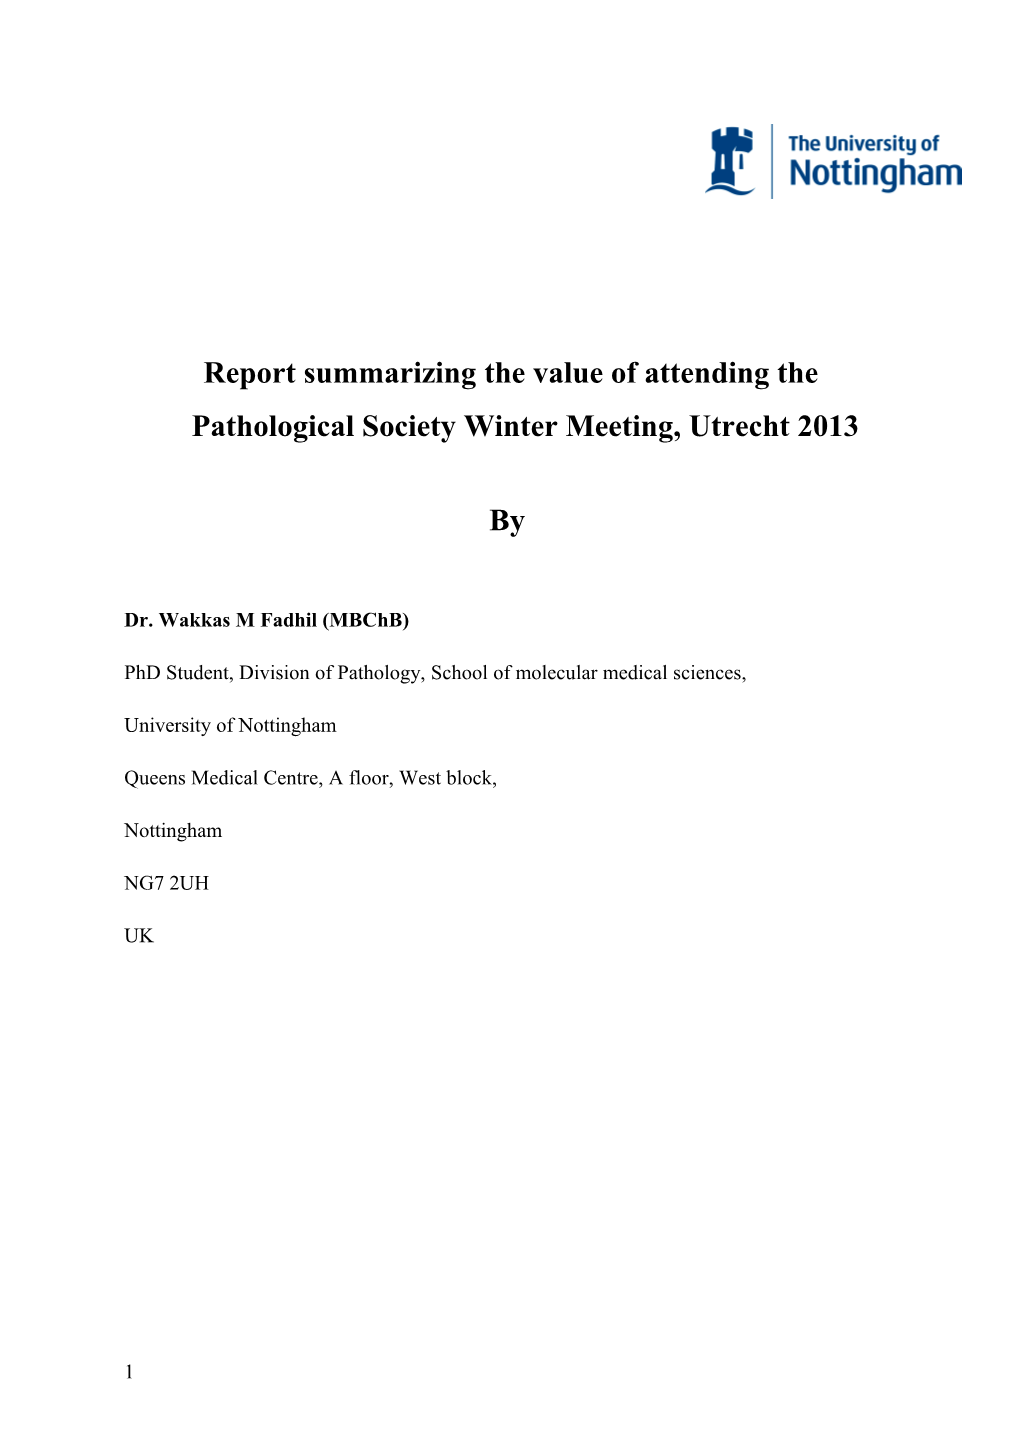 Report Summarizing the Value of Attending the Pathological Society Winter Meeting, Utrecht 2013